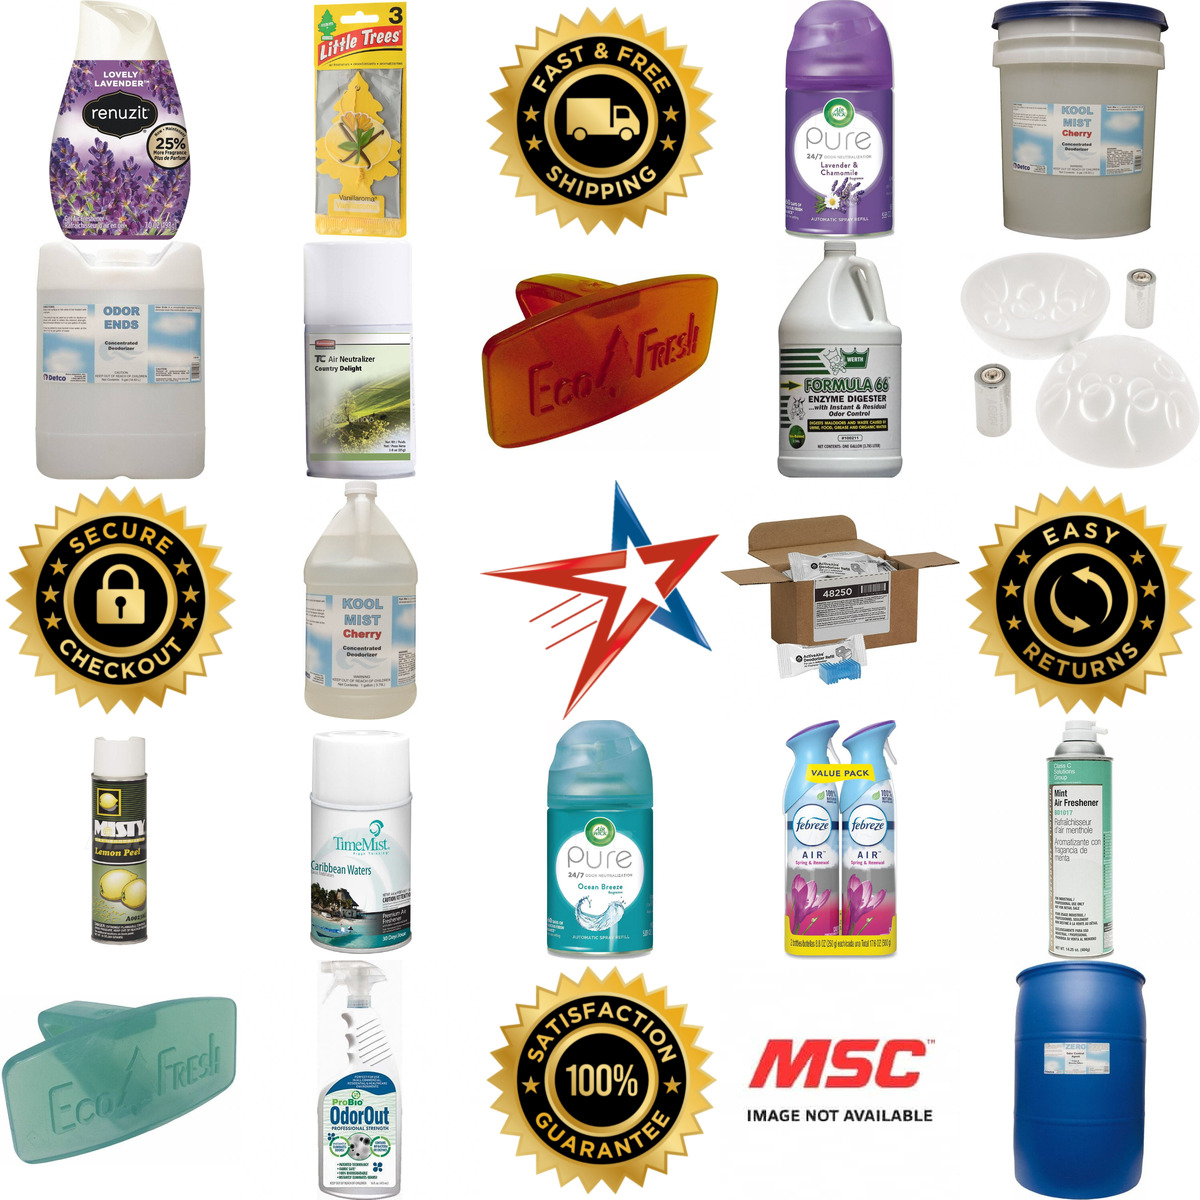 A selection of Odor Control Air Fresheners and Dryer Sheets products on GoVets